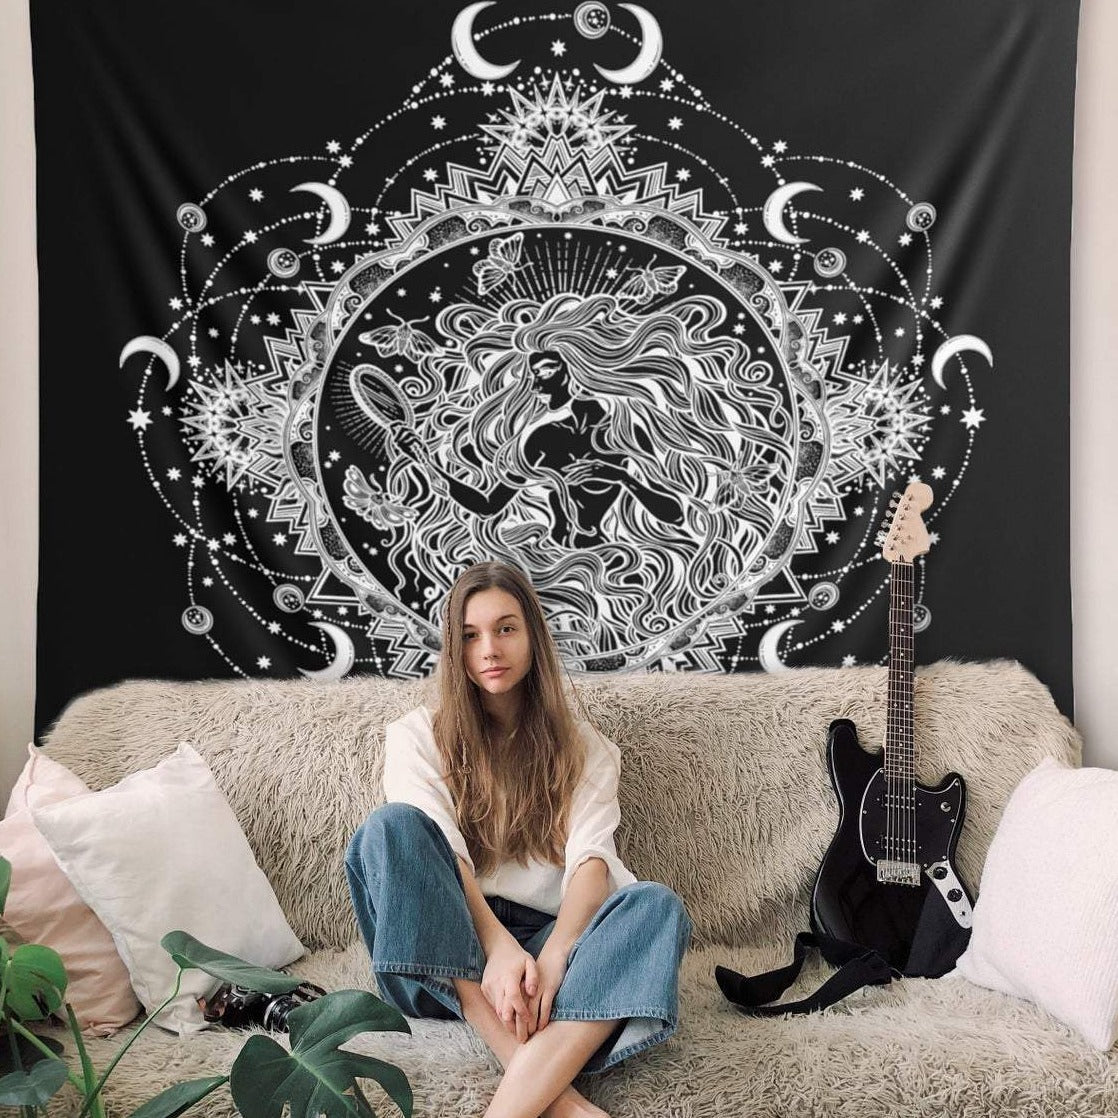 Black and White Mandala Wall Hanging Tapestry – All About Tidy